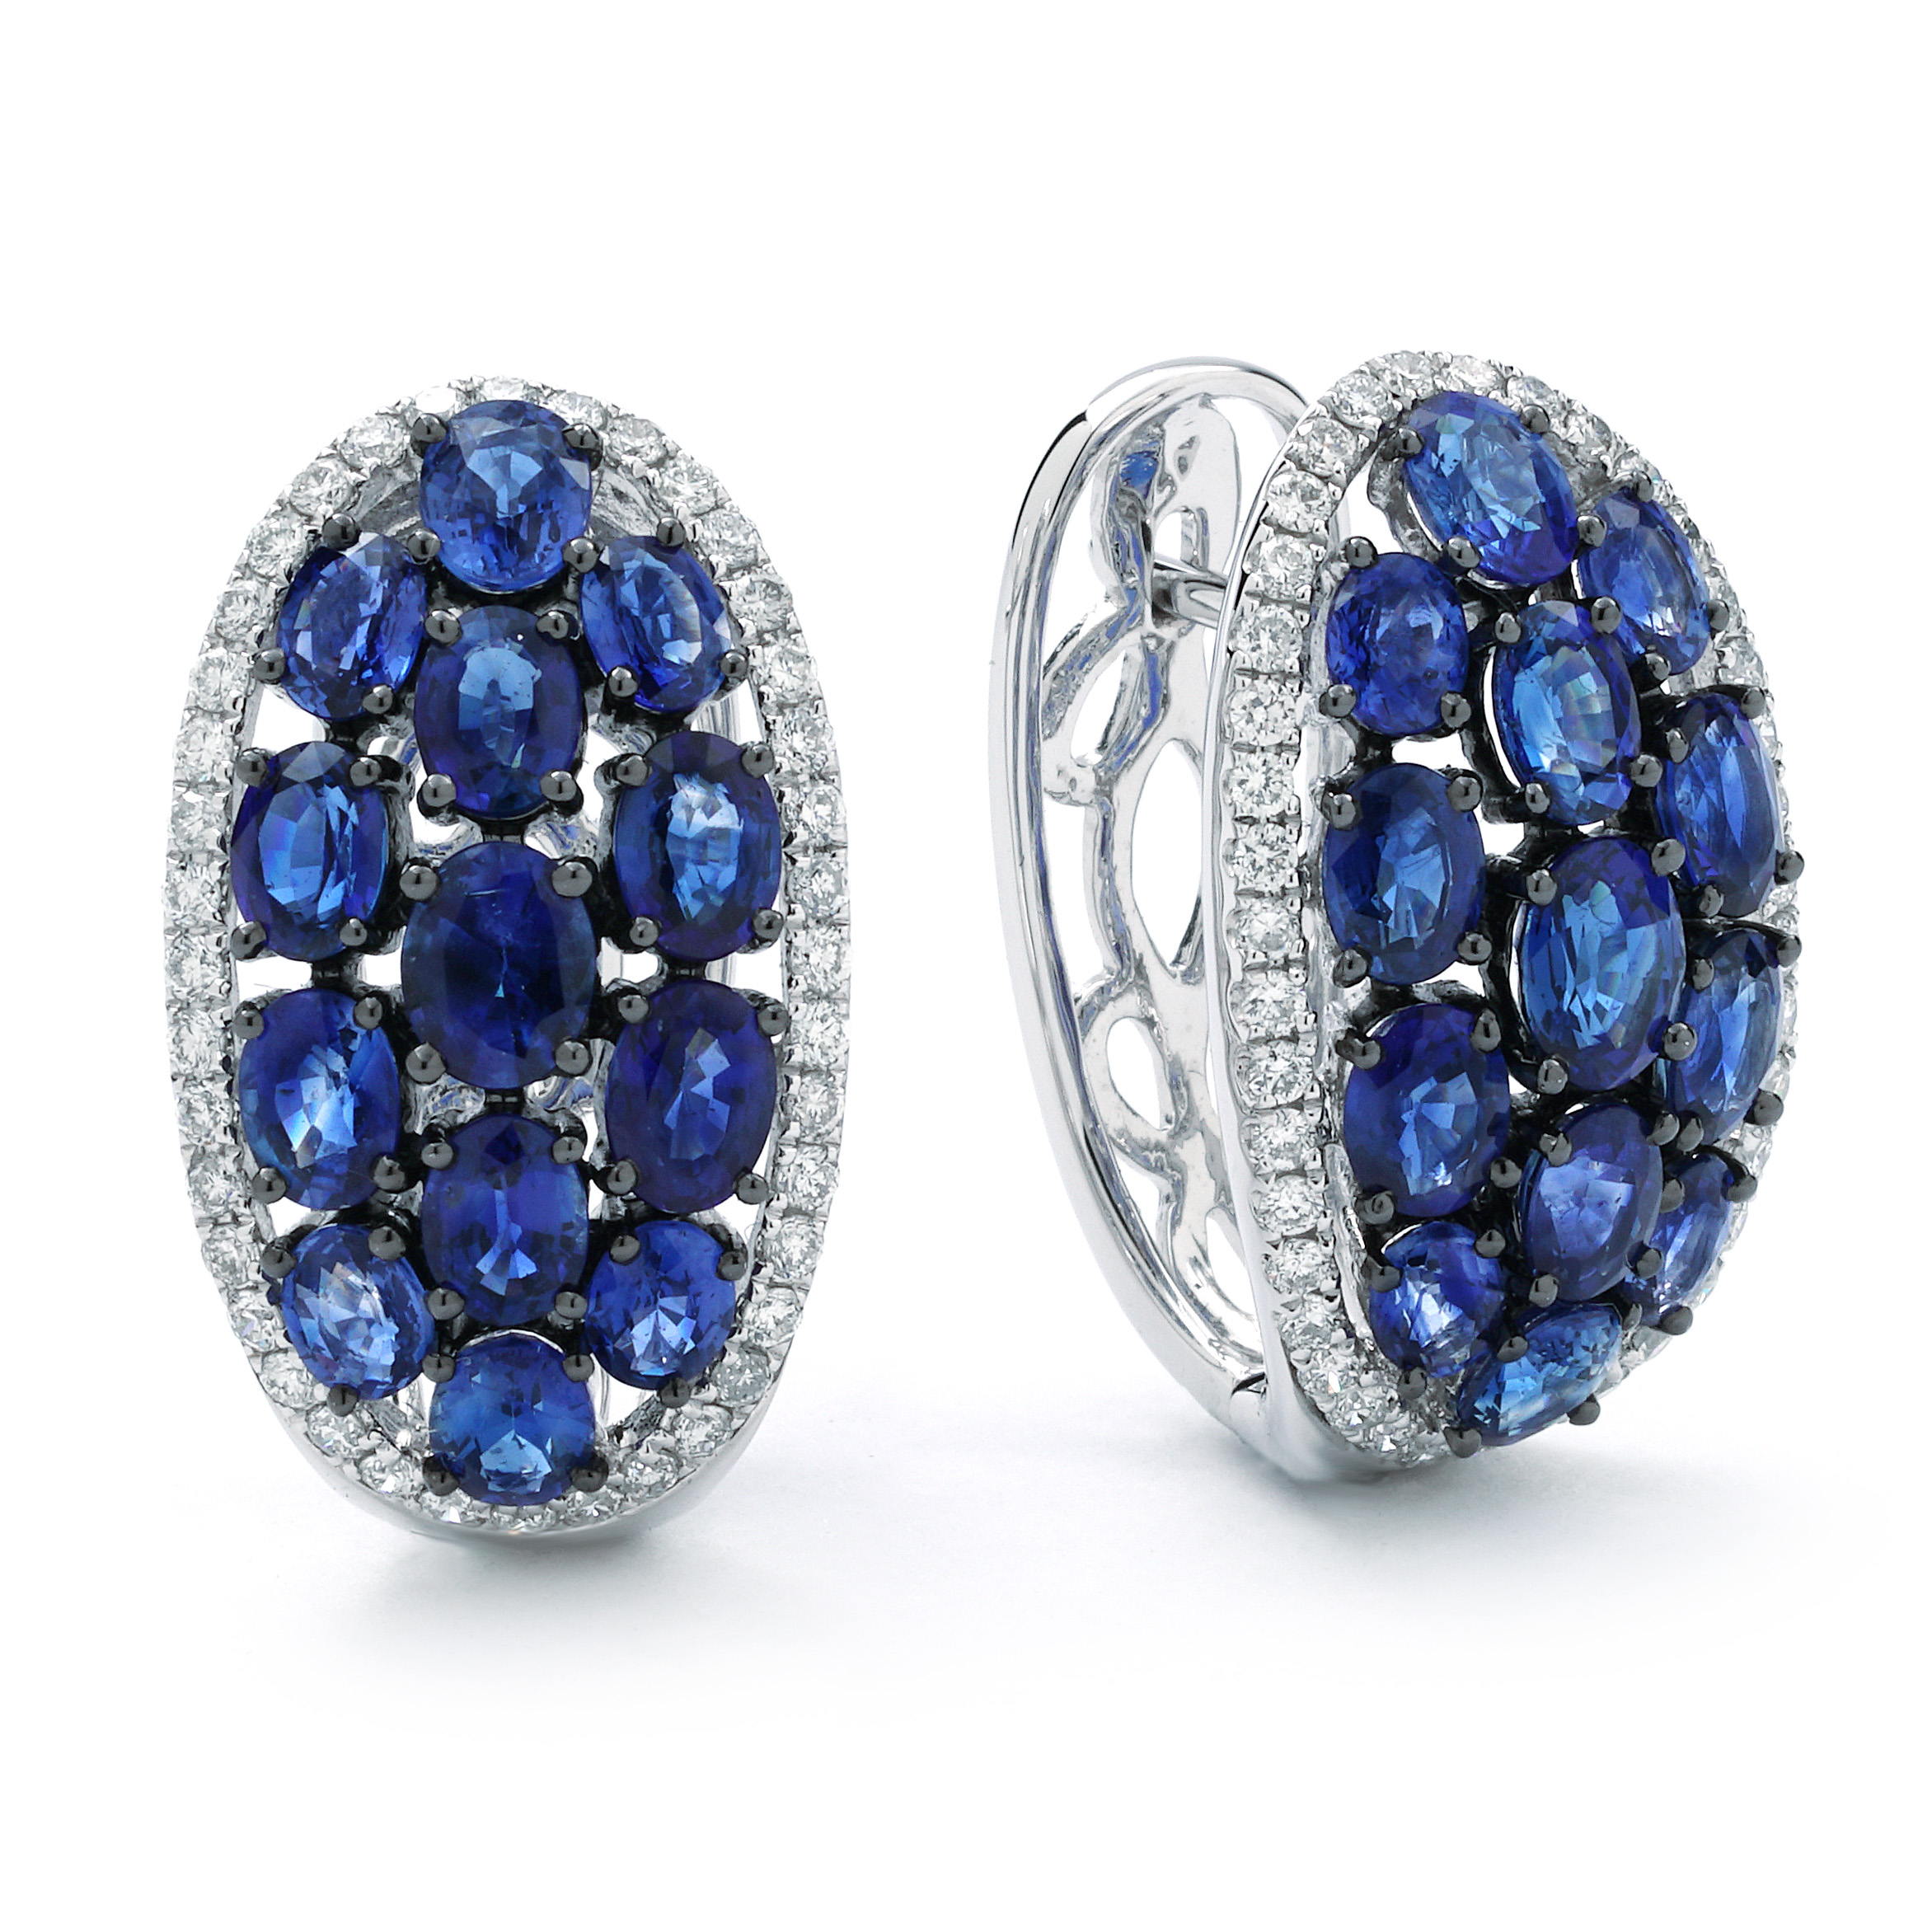 Large Pave Oval Sapphires & Diamond Halo Earrings in White Gold | New ...